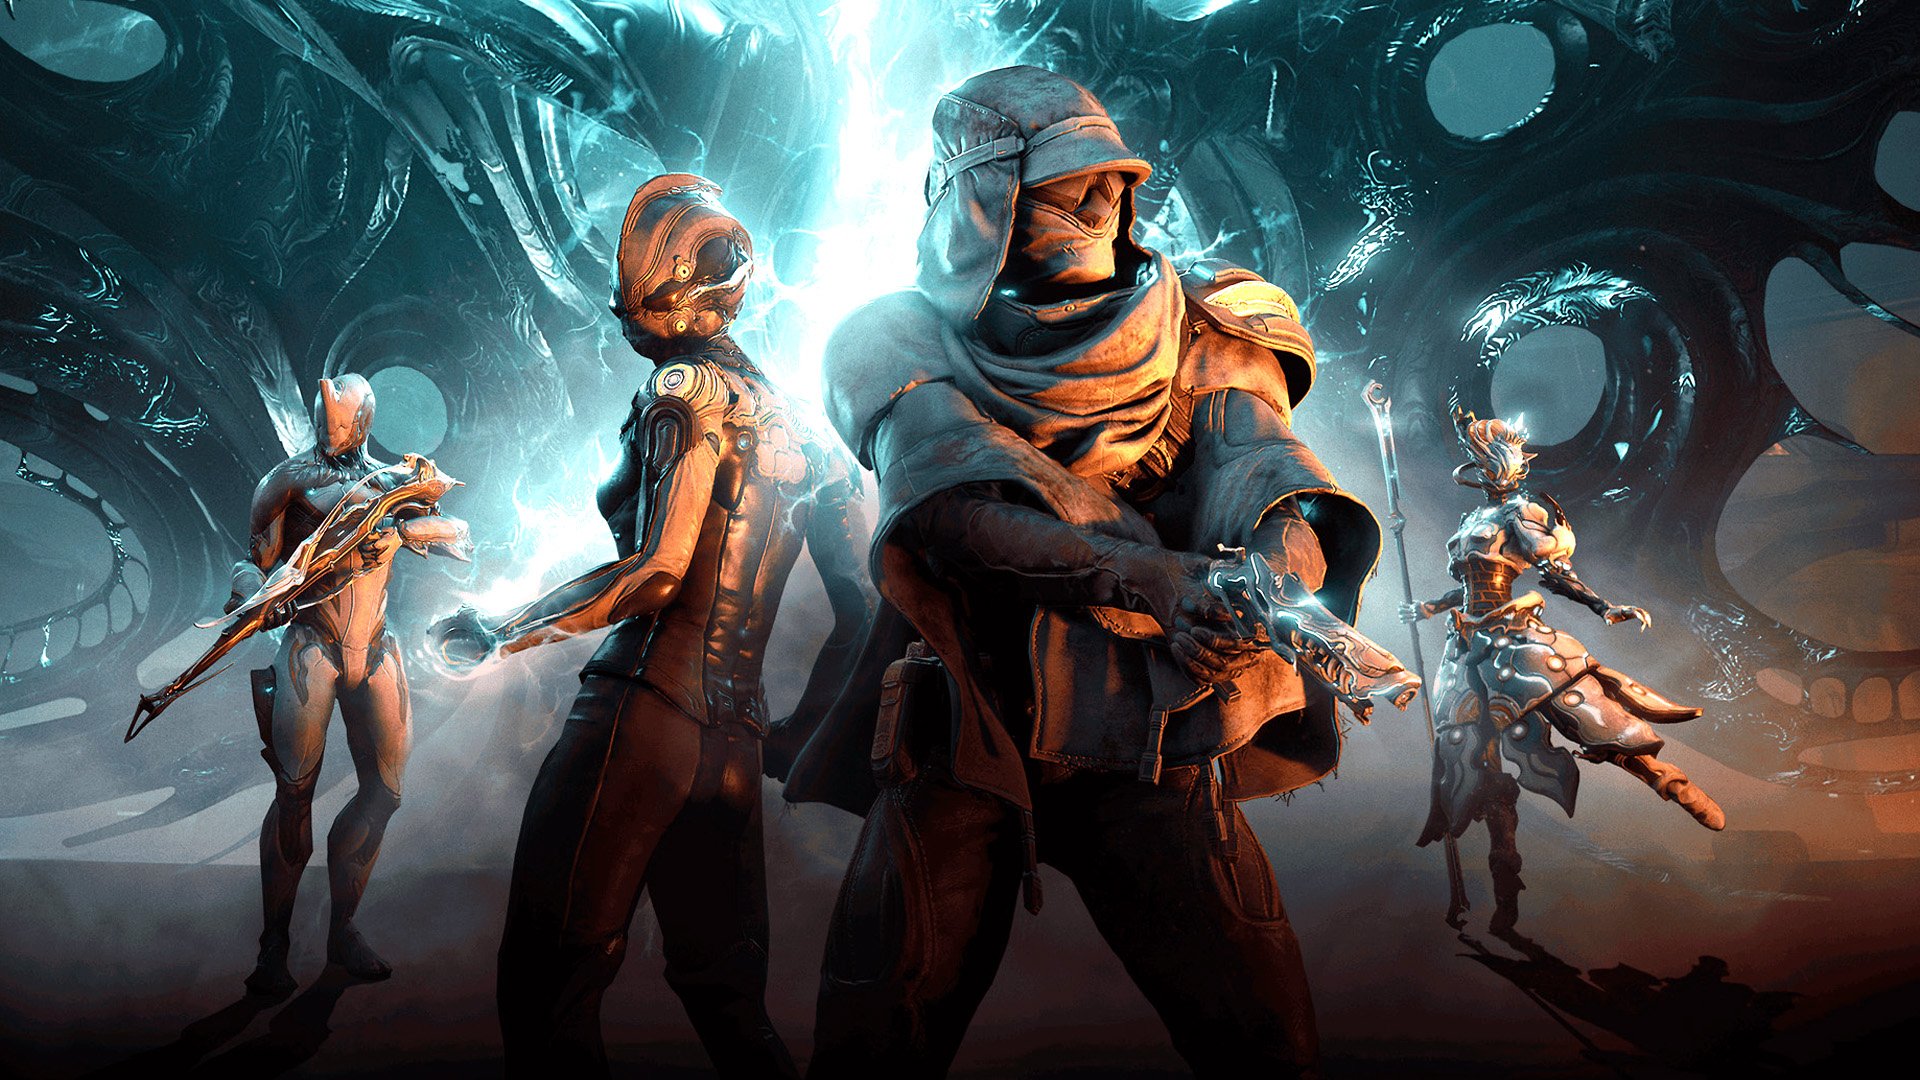 Warframe's developers announce Soulframe, a new free-to-play MMORPG –